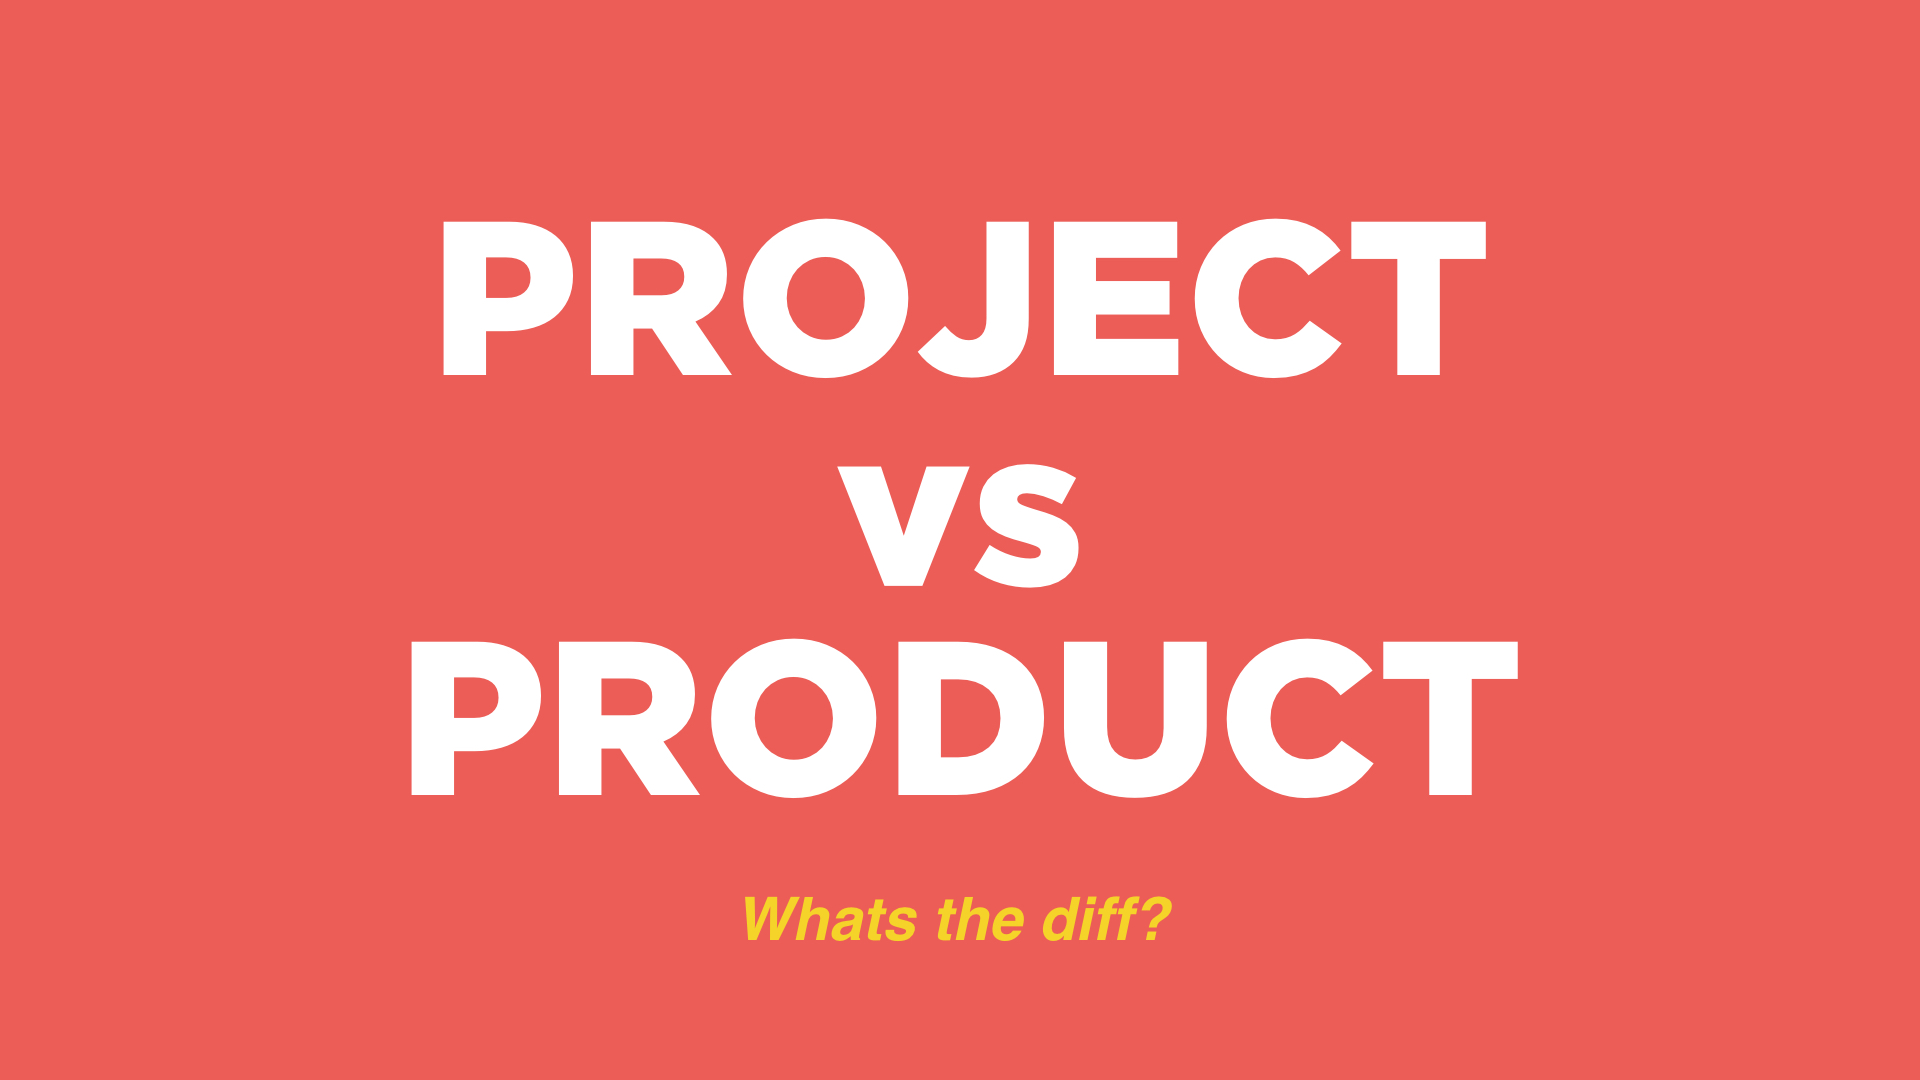 Project vs Product: What's the difference?